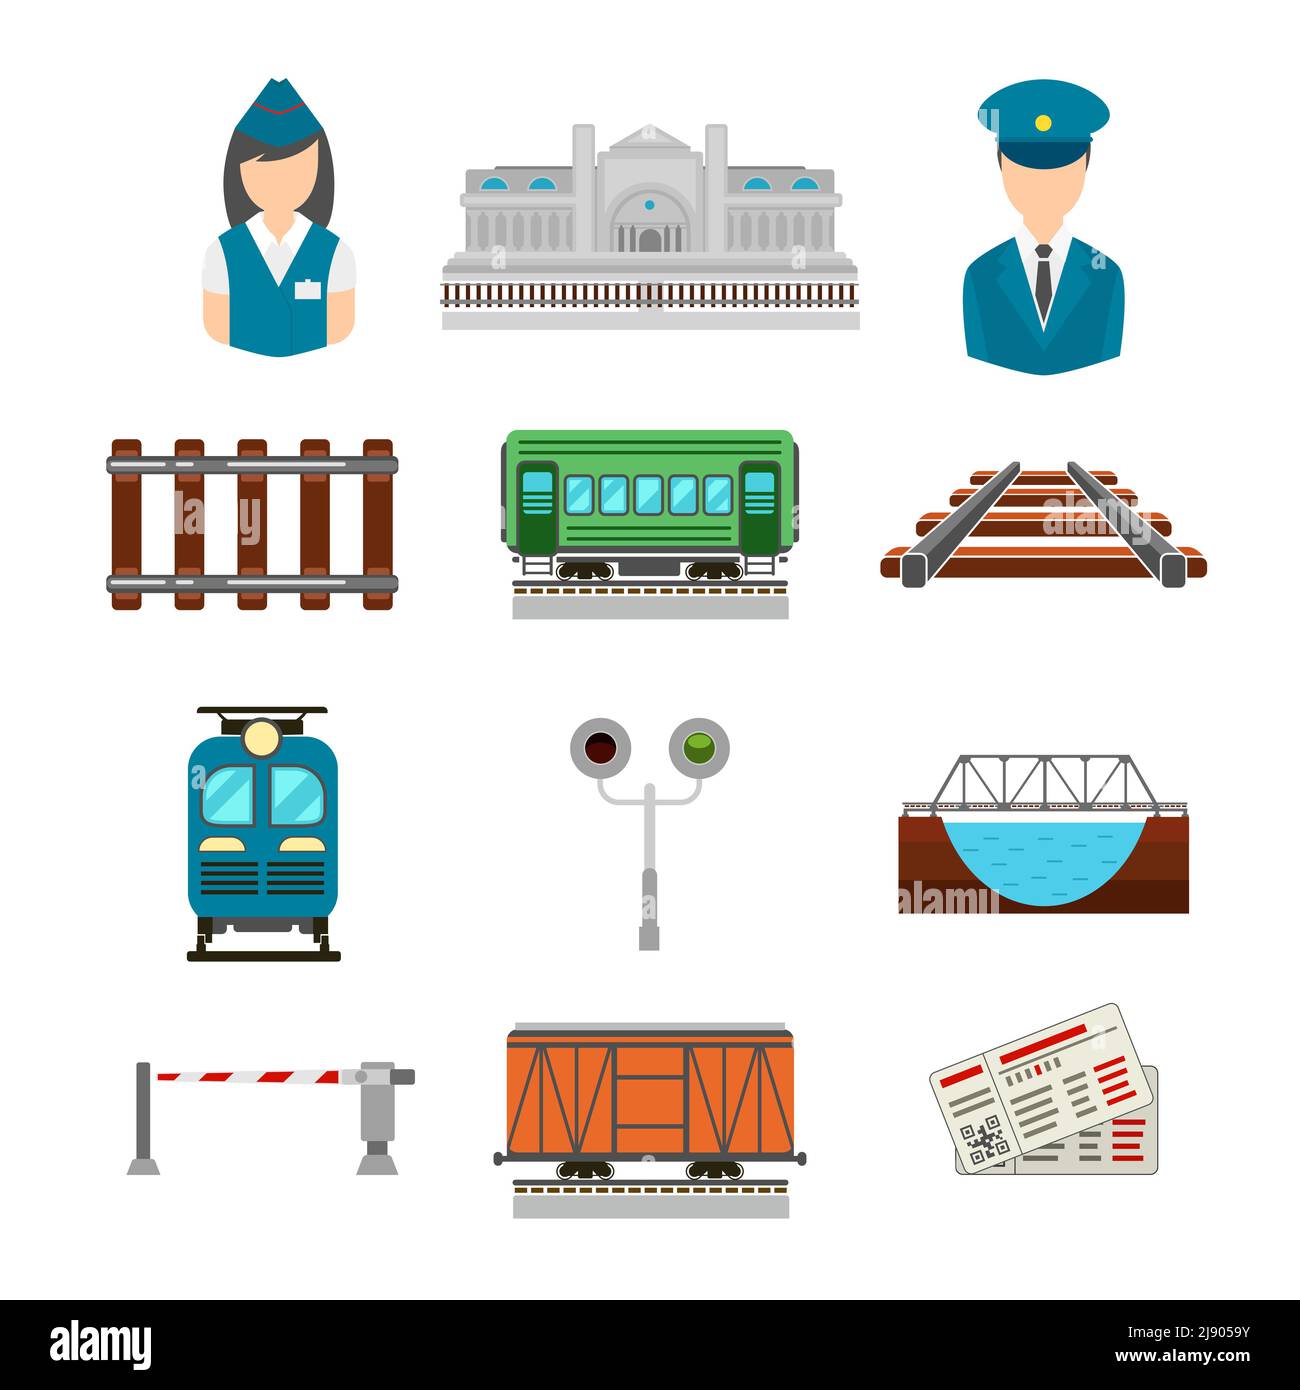 Vector set of railroad icons in flat style. Bridge and gate, ticket and railway station, driver and conductor, platform transportation illustration Stock Vector